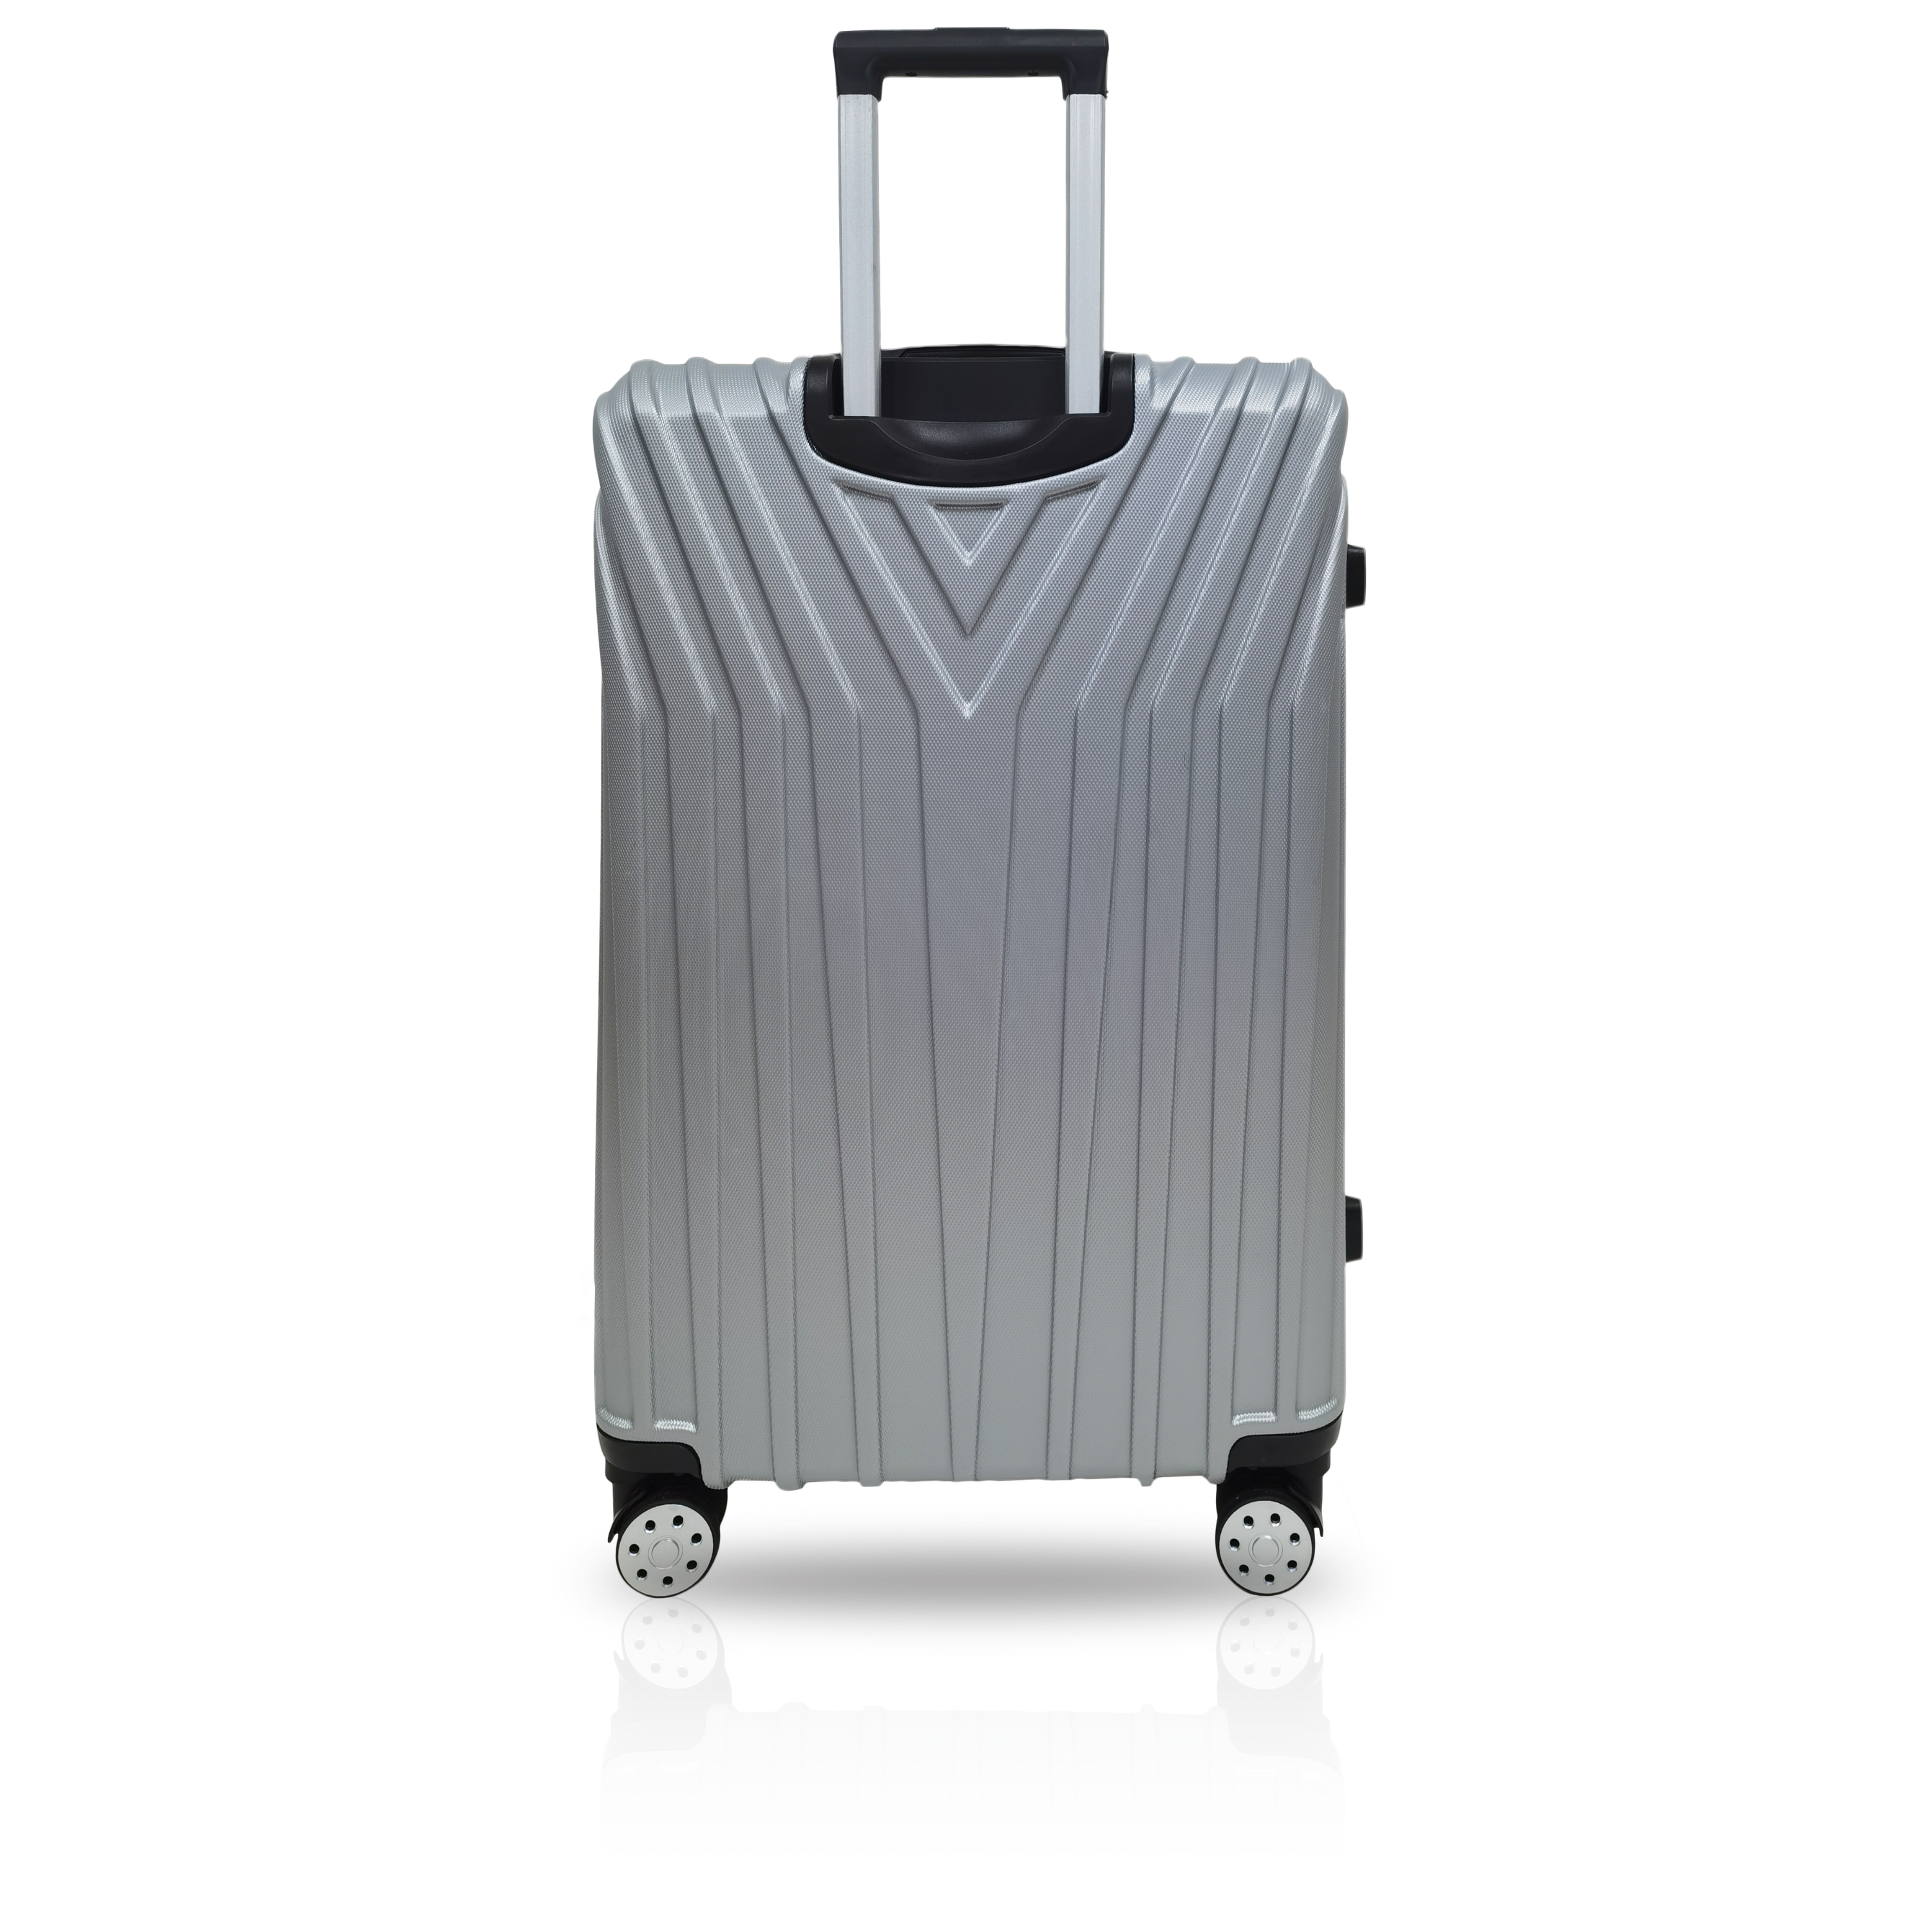 TUCCI BORDO ABS 20" Carry On Luggage Suitcase